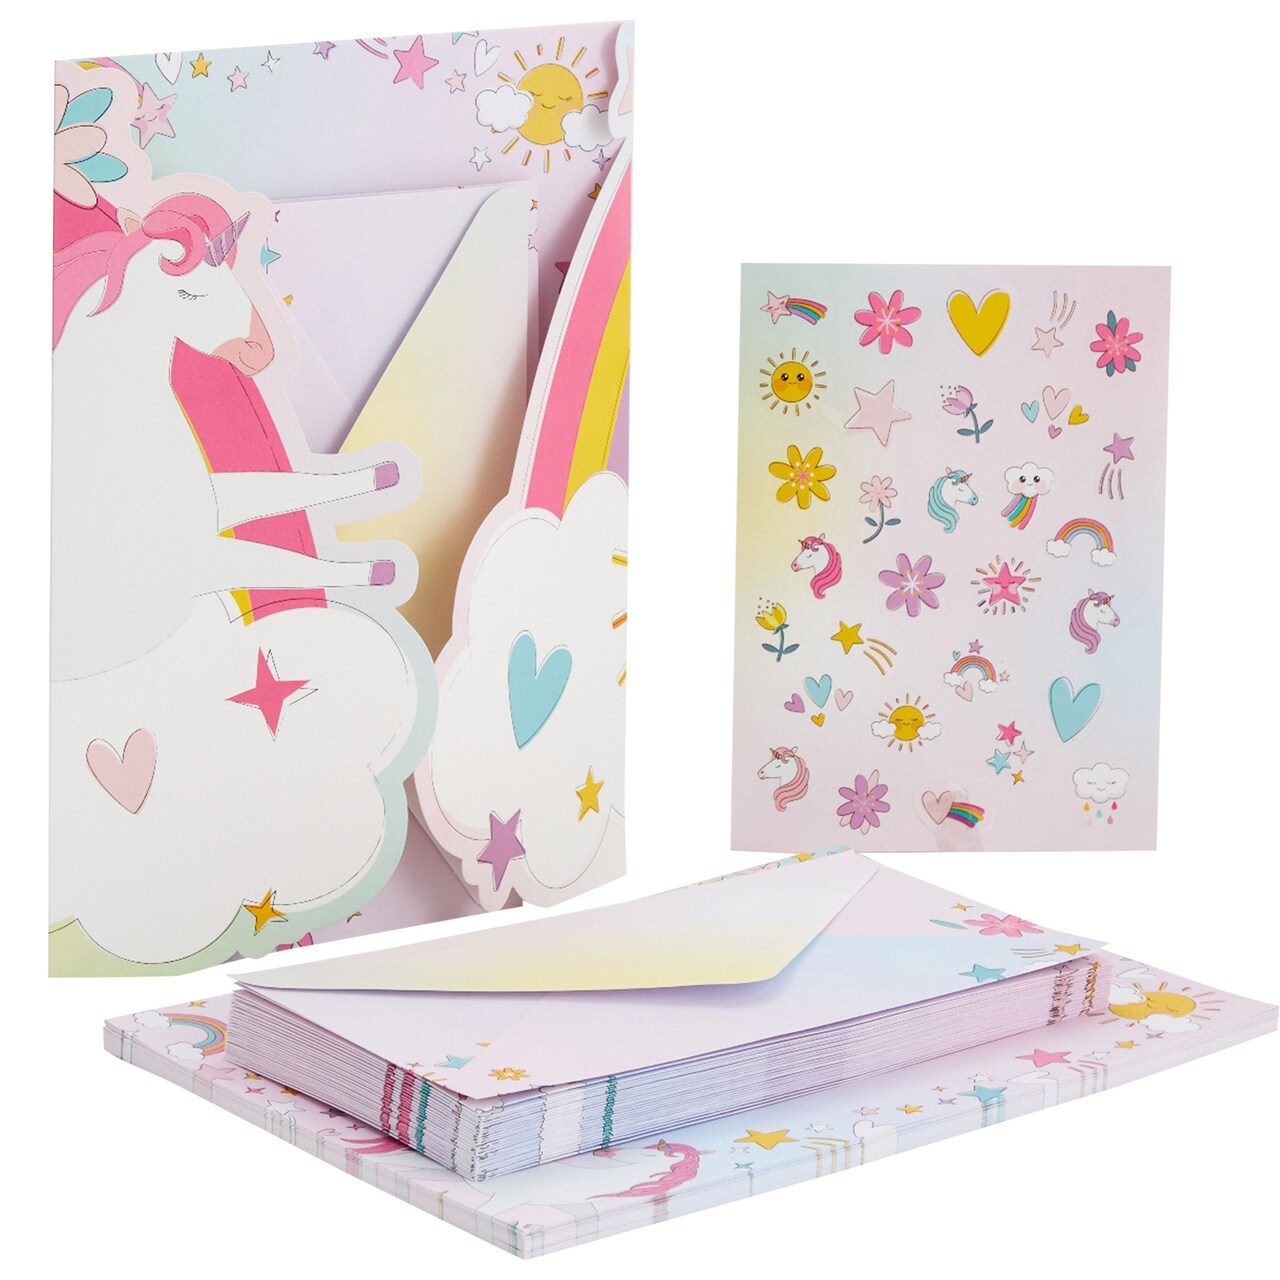 60 Sheet Kids Unicorn Stationery Paper with 30 Envelopes and Pocket Folder  for Girls (7.25 x 10.2 In)